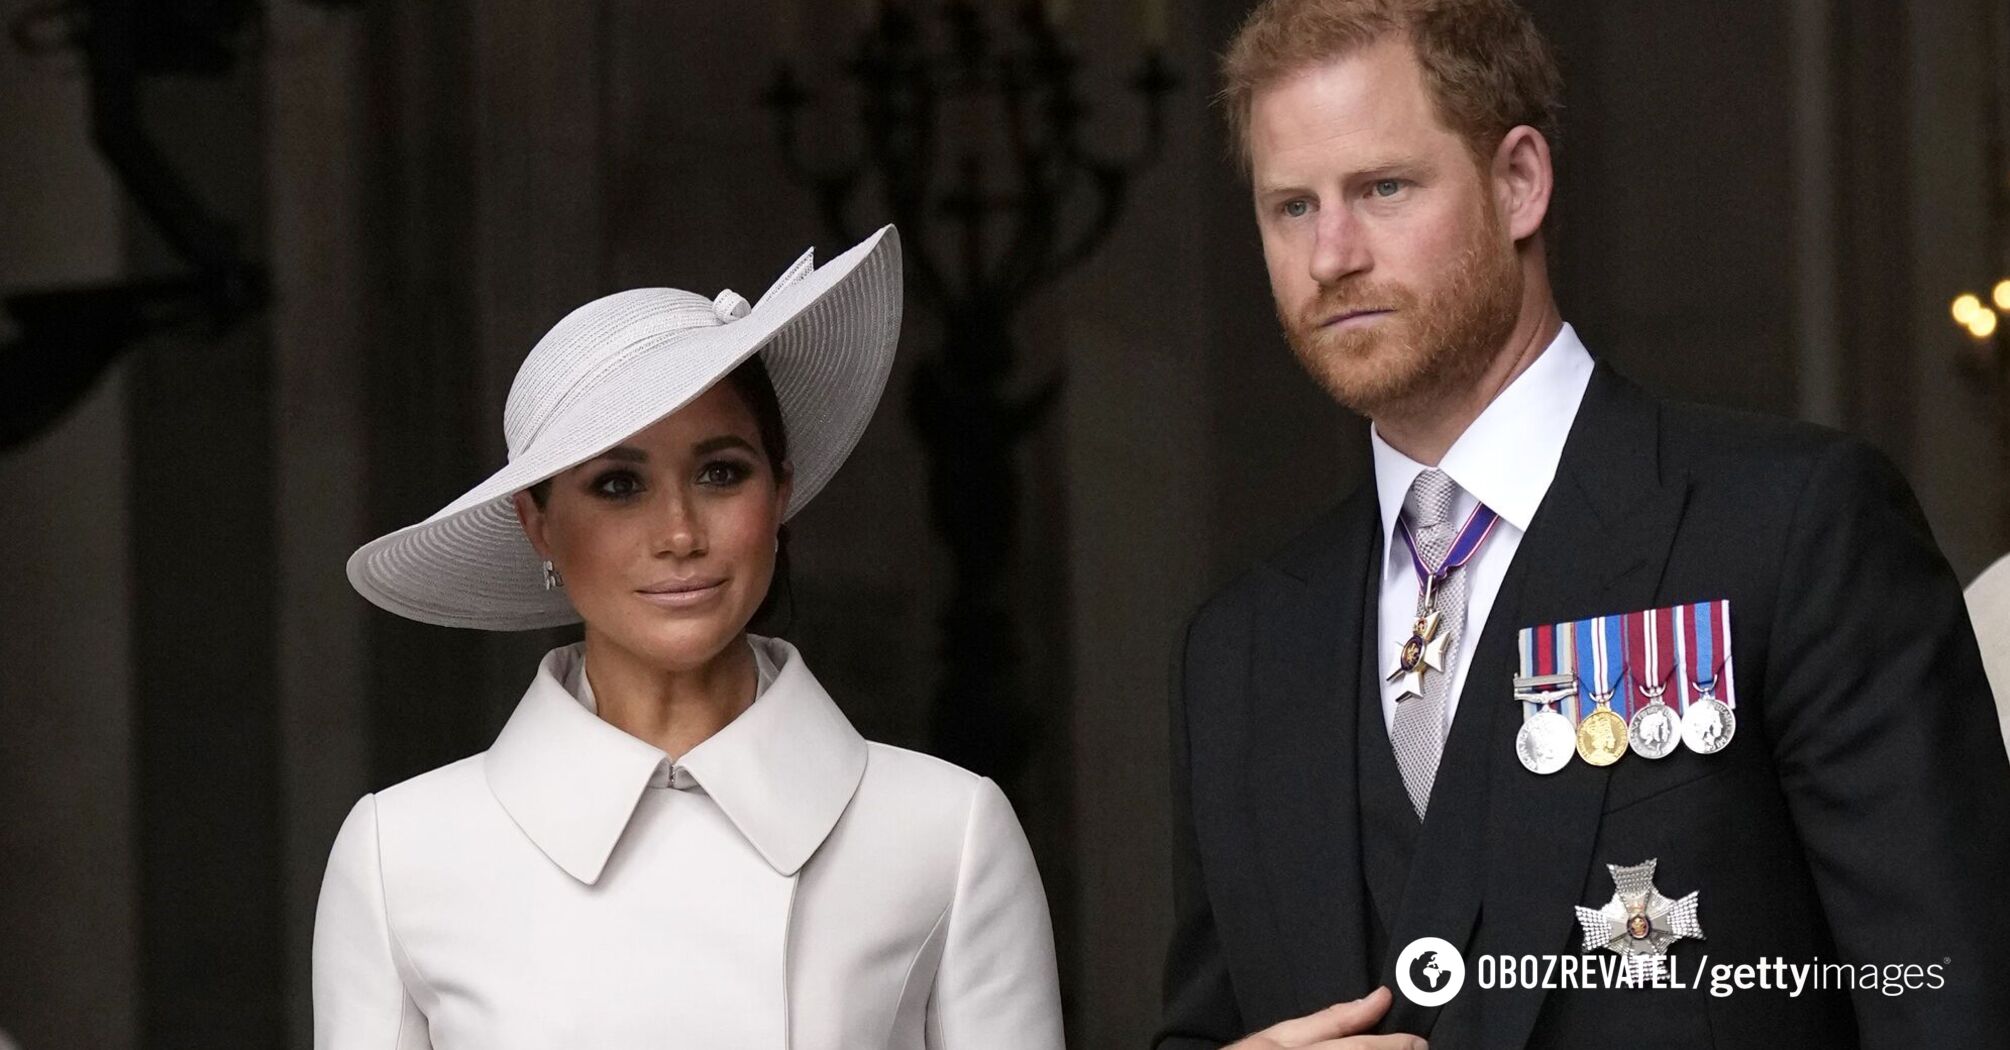 The royal family has removed Prince Harry's statement about his affair with Meghan Markle from the official website